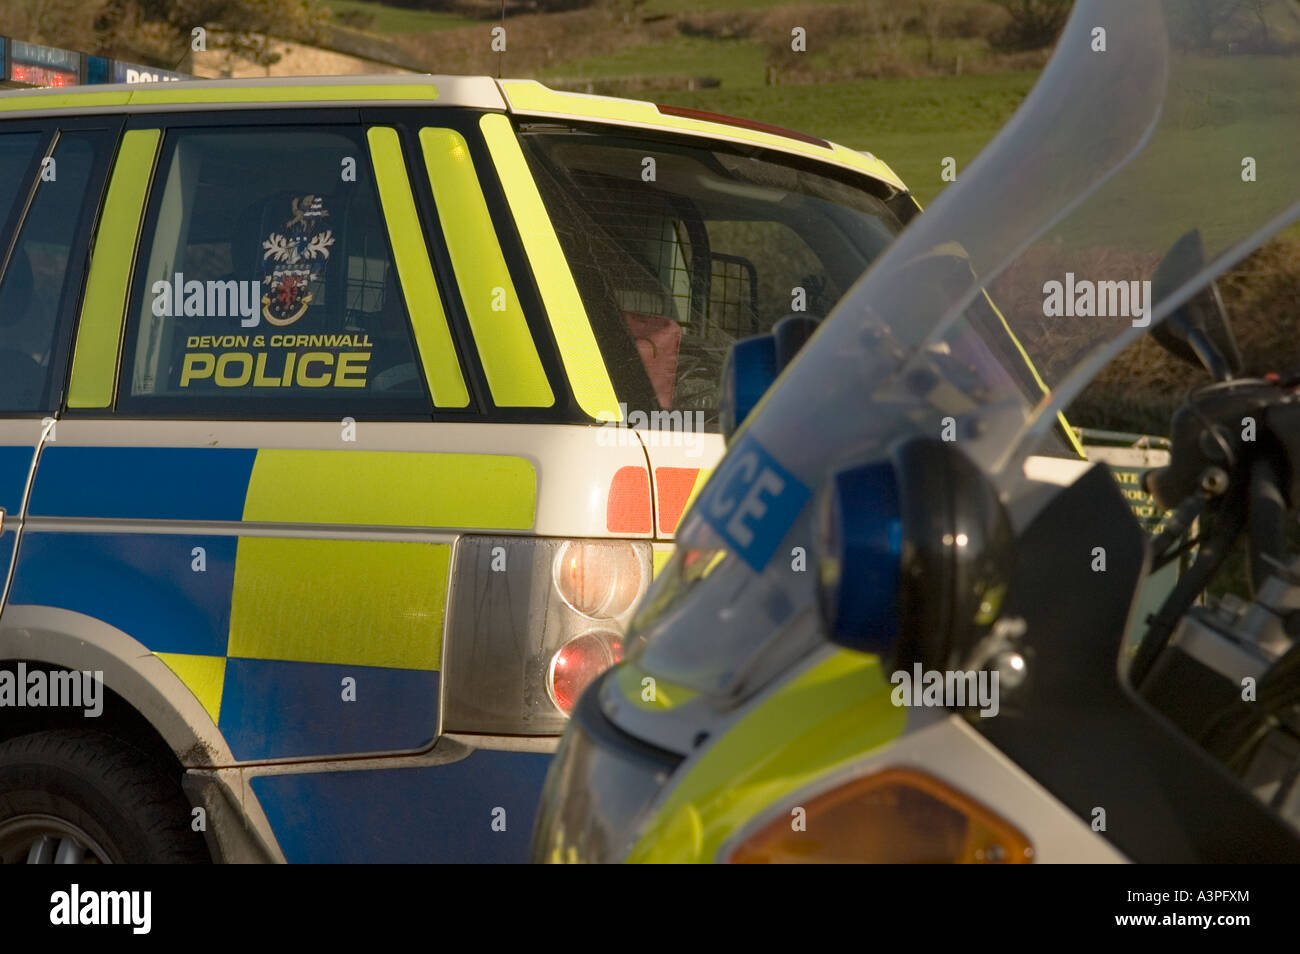 Devon and Cornwall police vehicles in a car park in Branscombe Stock Photo